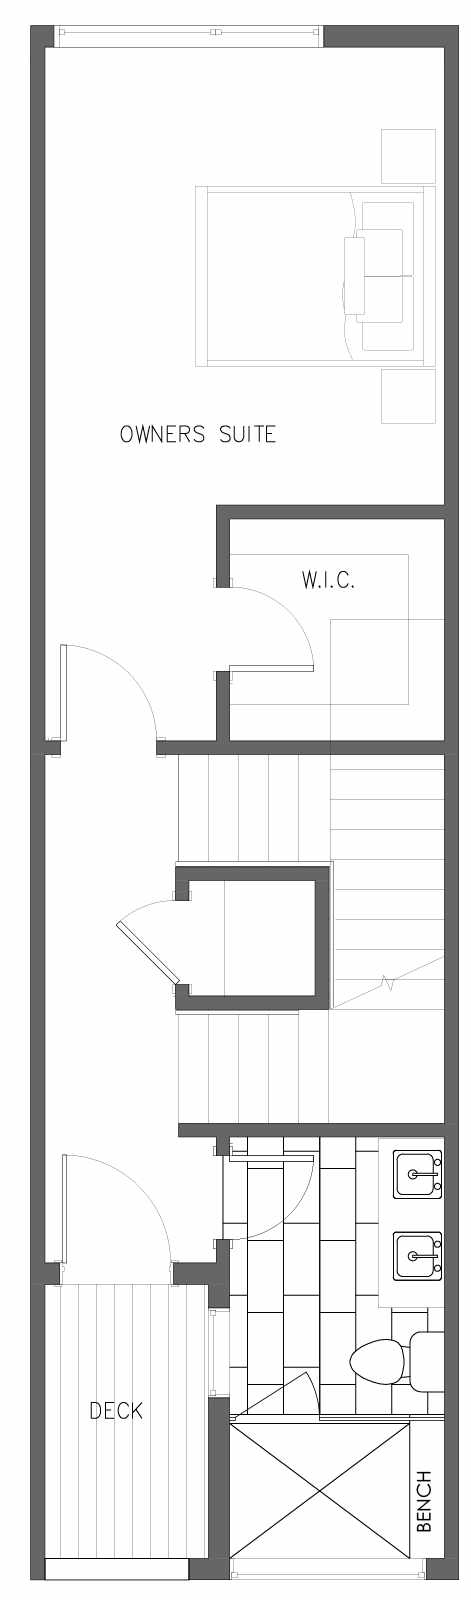 Third Floor Plan of 5612 NE 60th St., One of the Kendal Townhomes in Windermere by Isola Homes